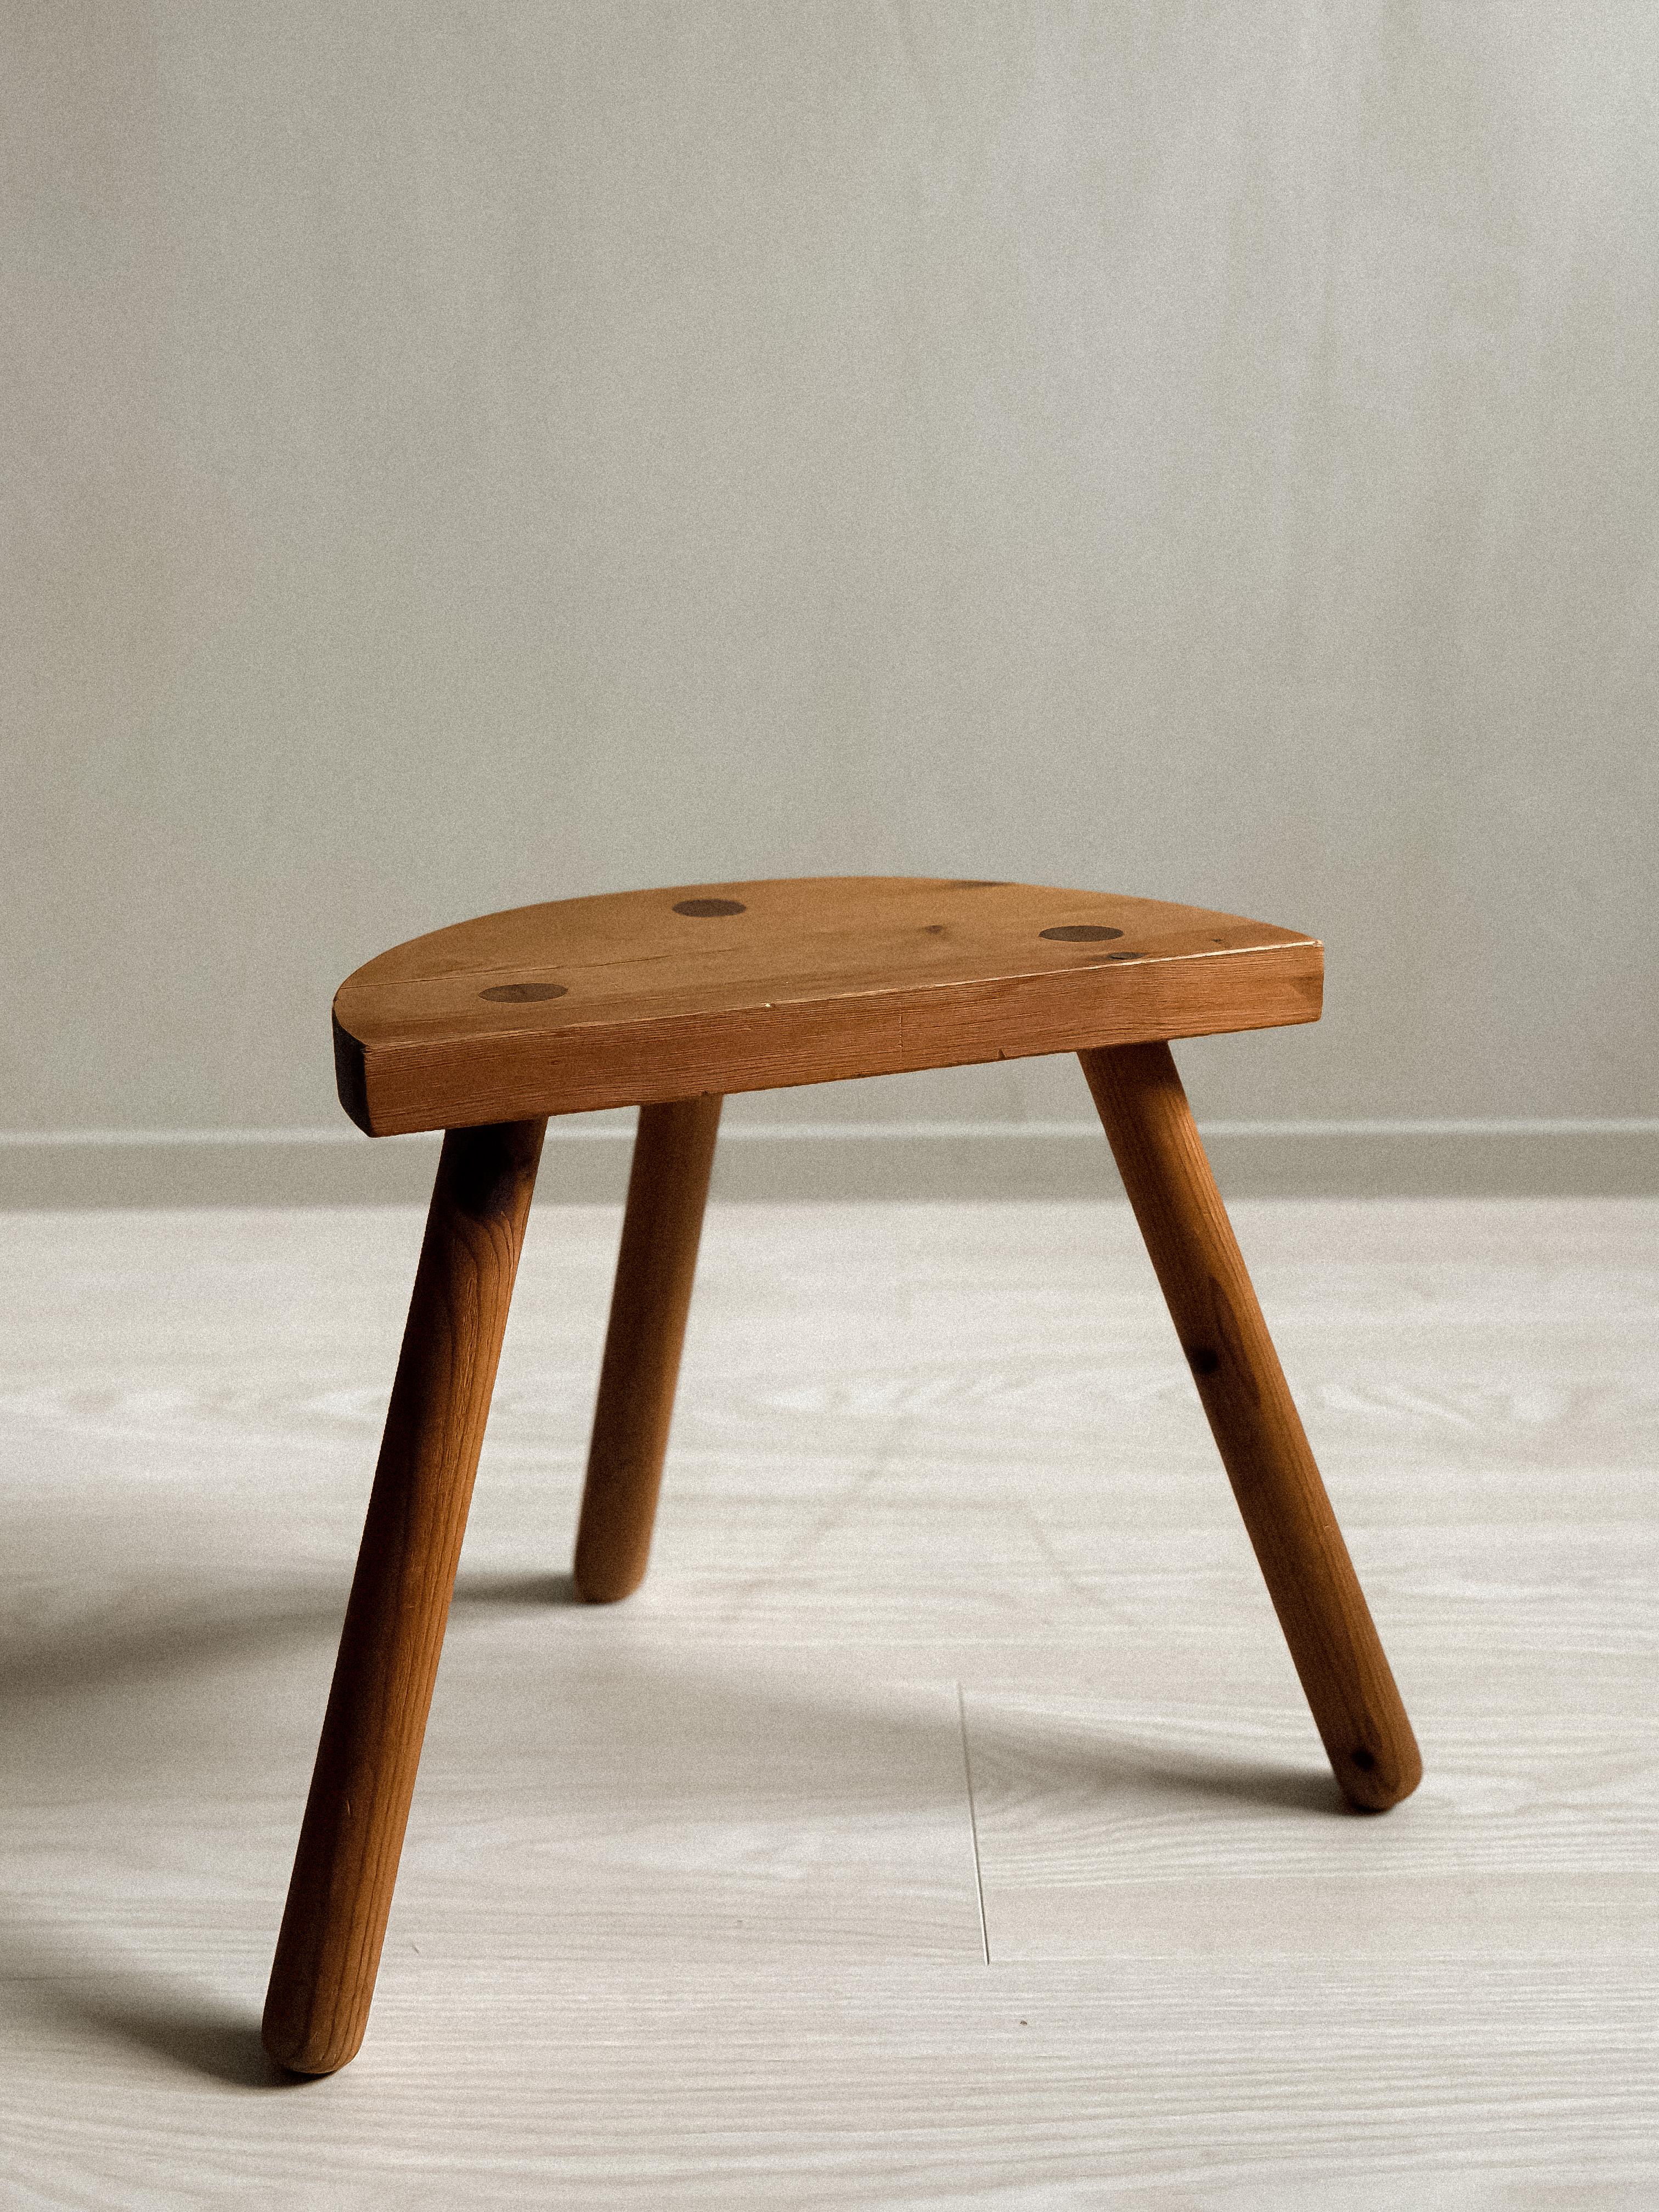 A Scandinavian Mid-Century milking stool by unknown designer, Norway, c. 1960s. Pinewood with lovely patina. In good vintage conditioon with wear consitent with age and use. 